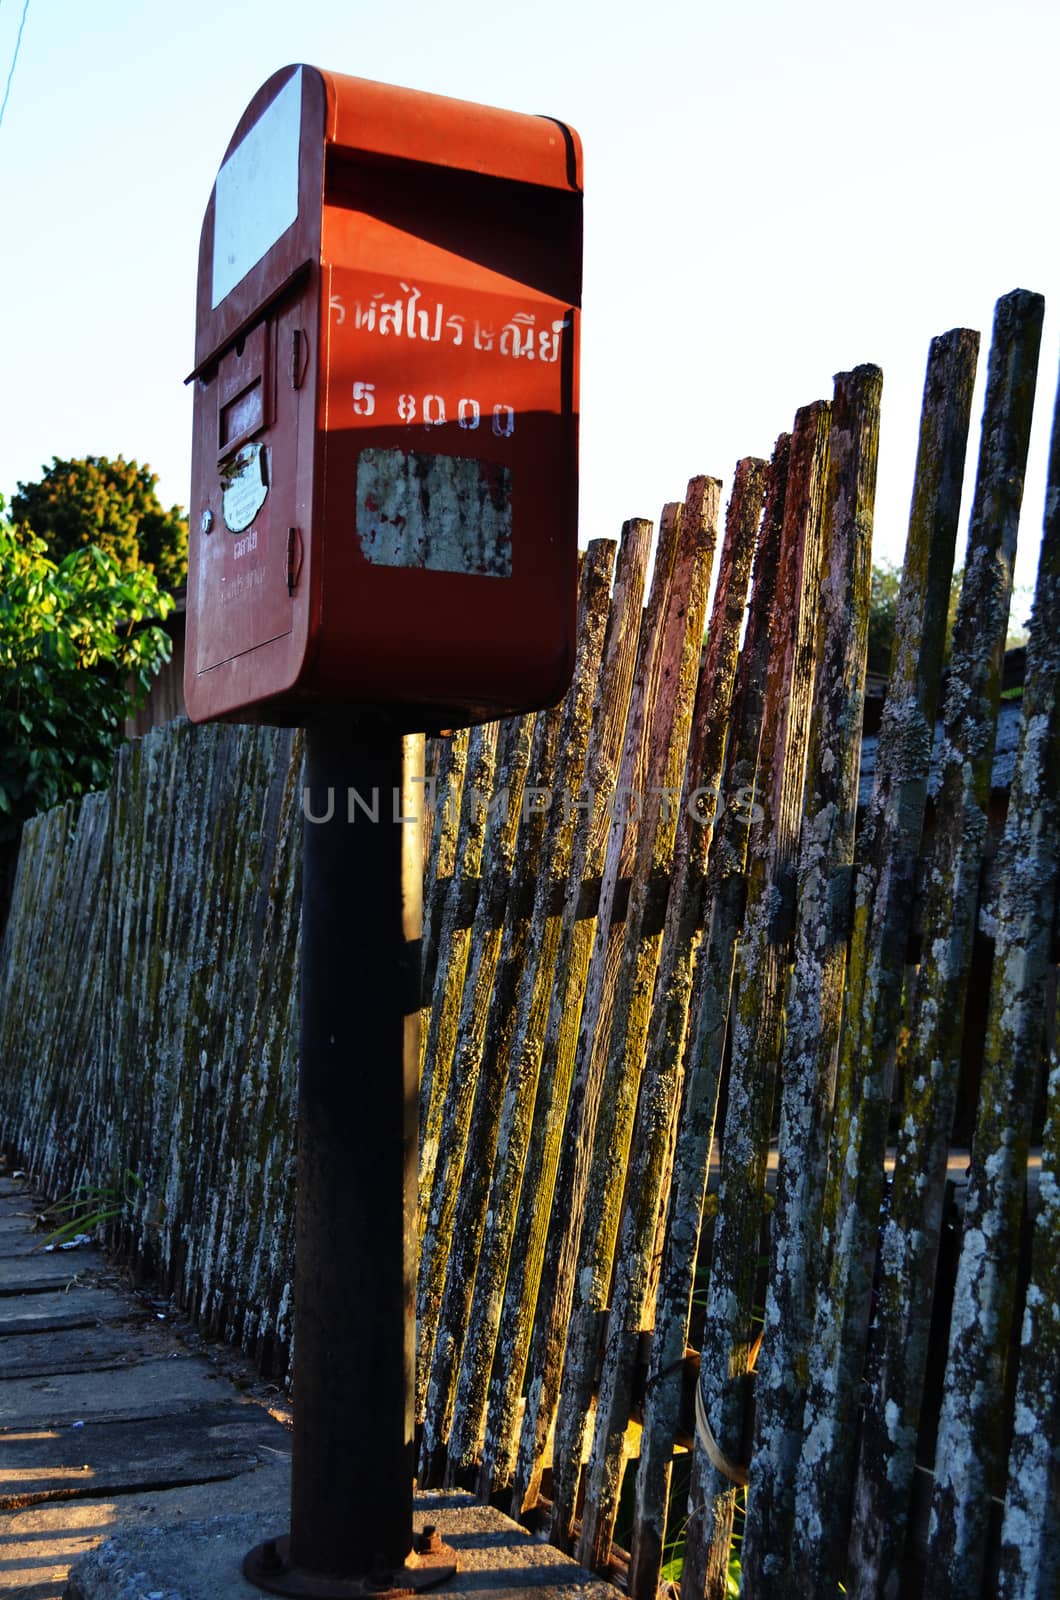 Little Metal Postbox in Rural of Thailand.